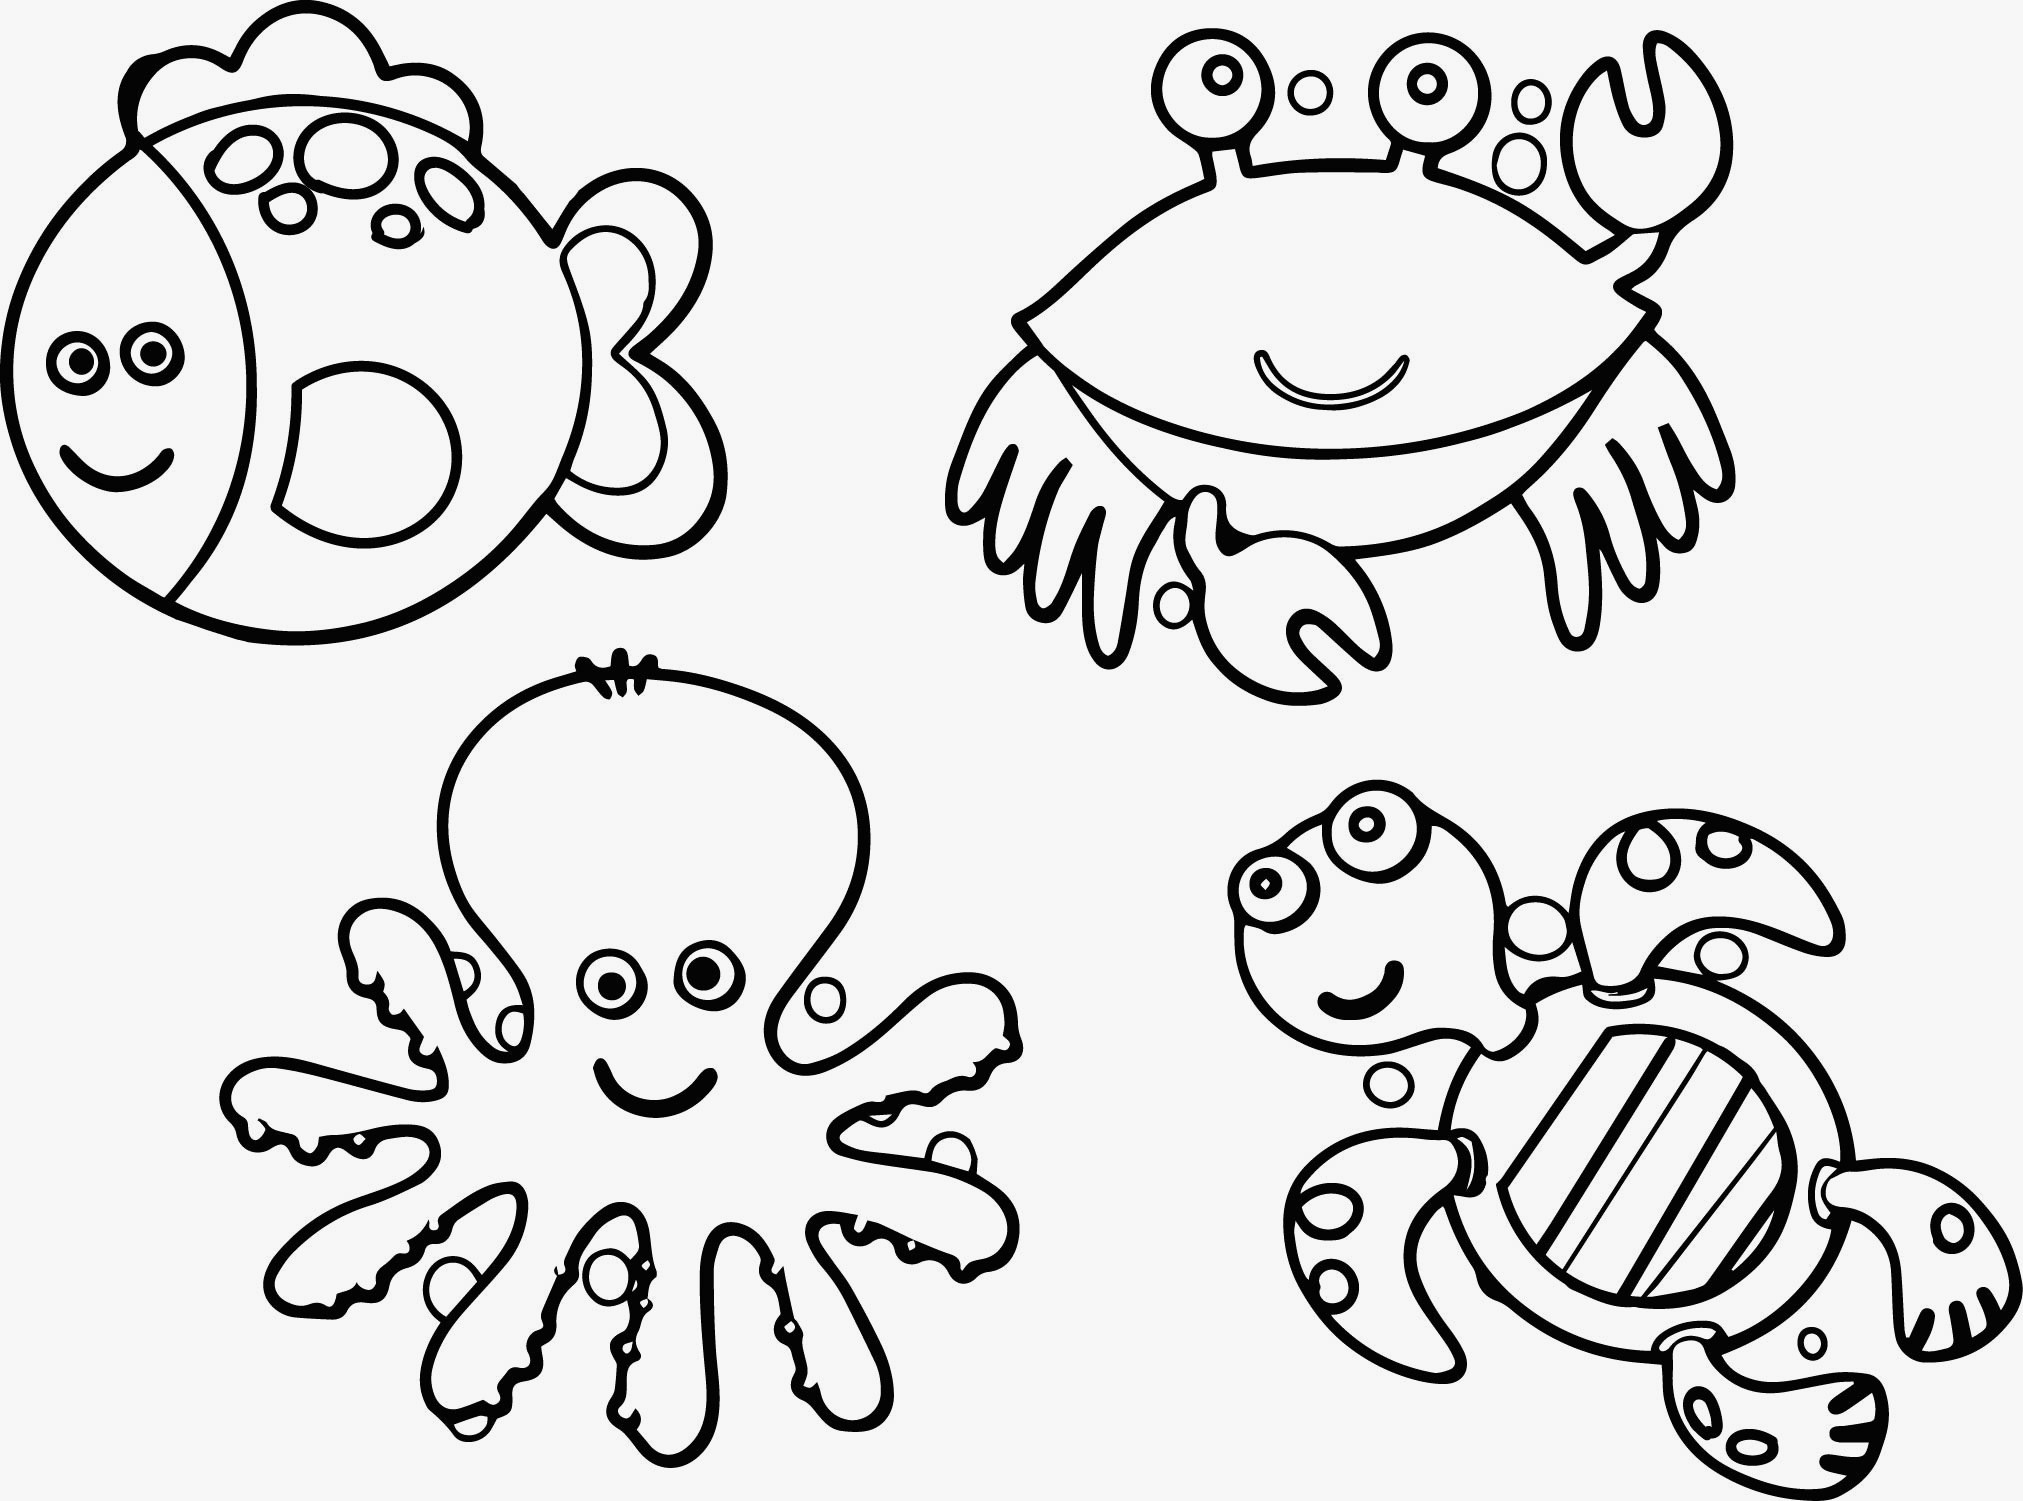 sea-animals-coloring-pages-of-sea-animals-coloring-pages Sea Animals Coloring Pages Animal 